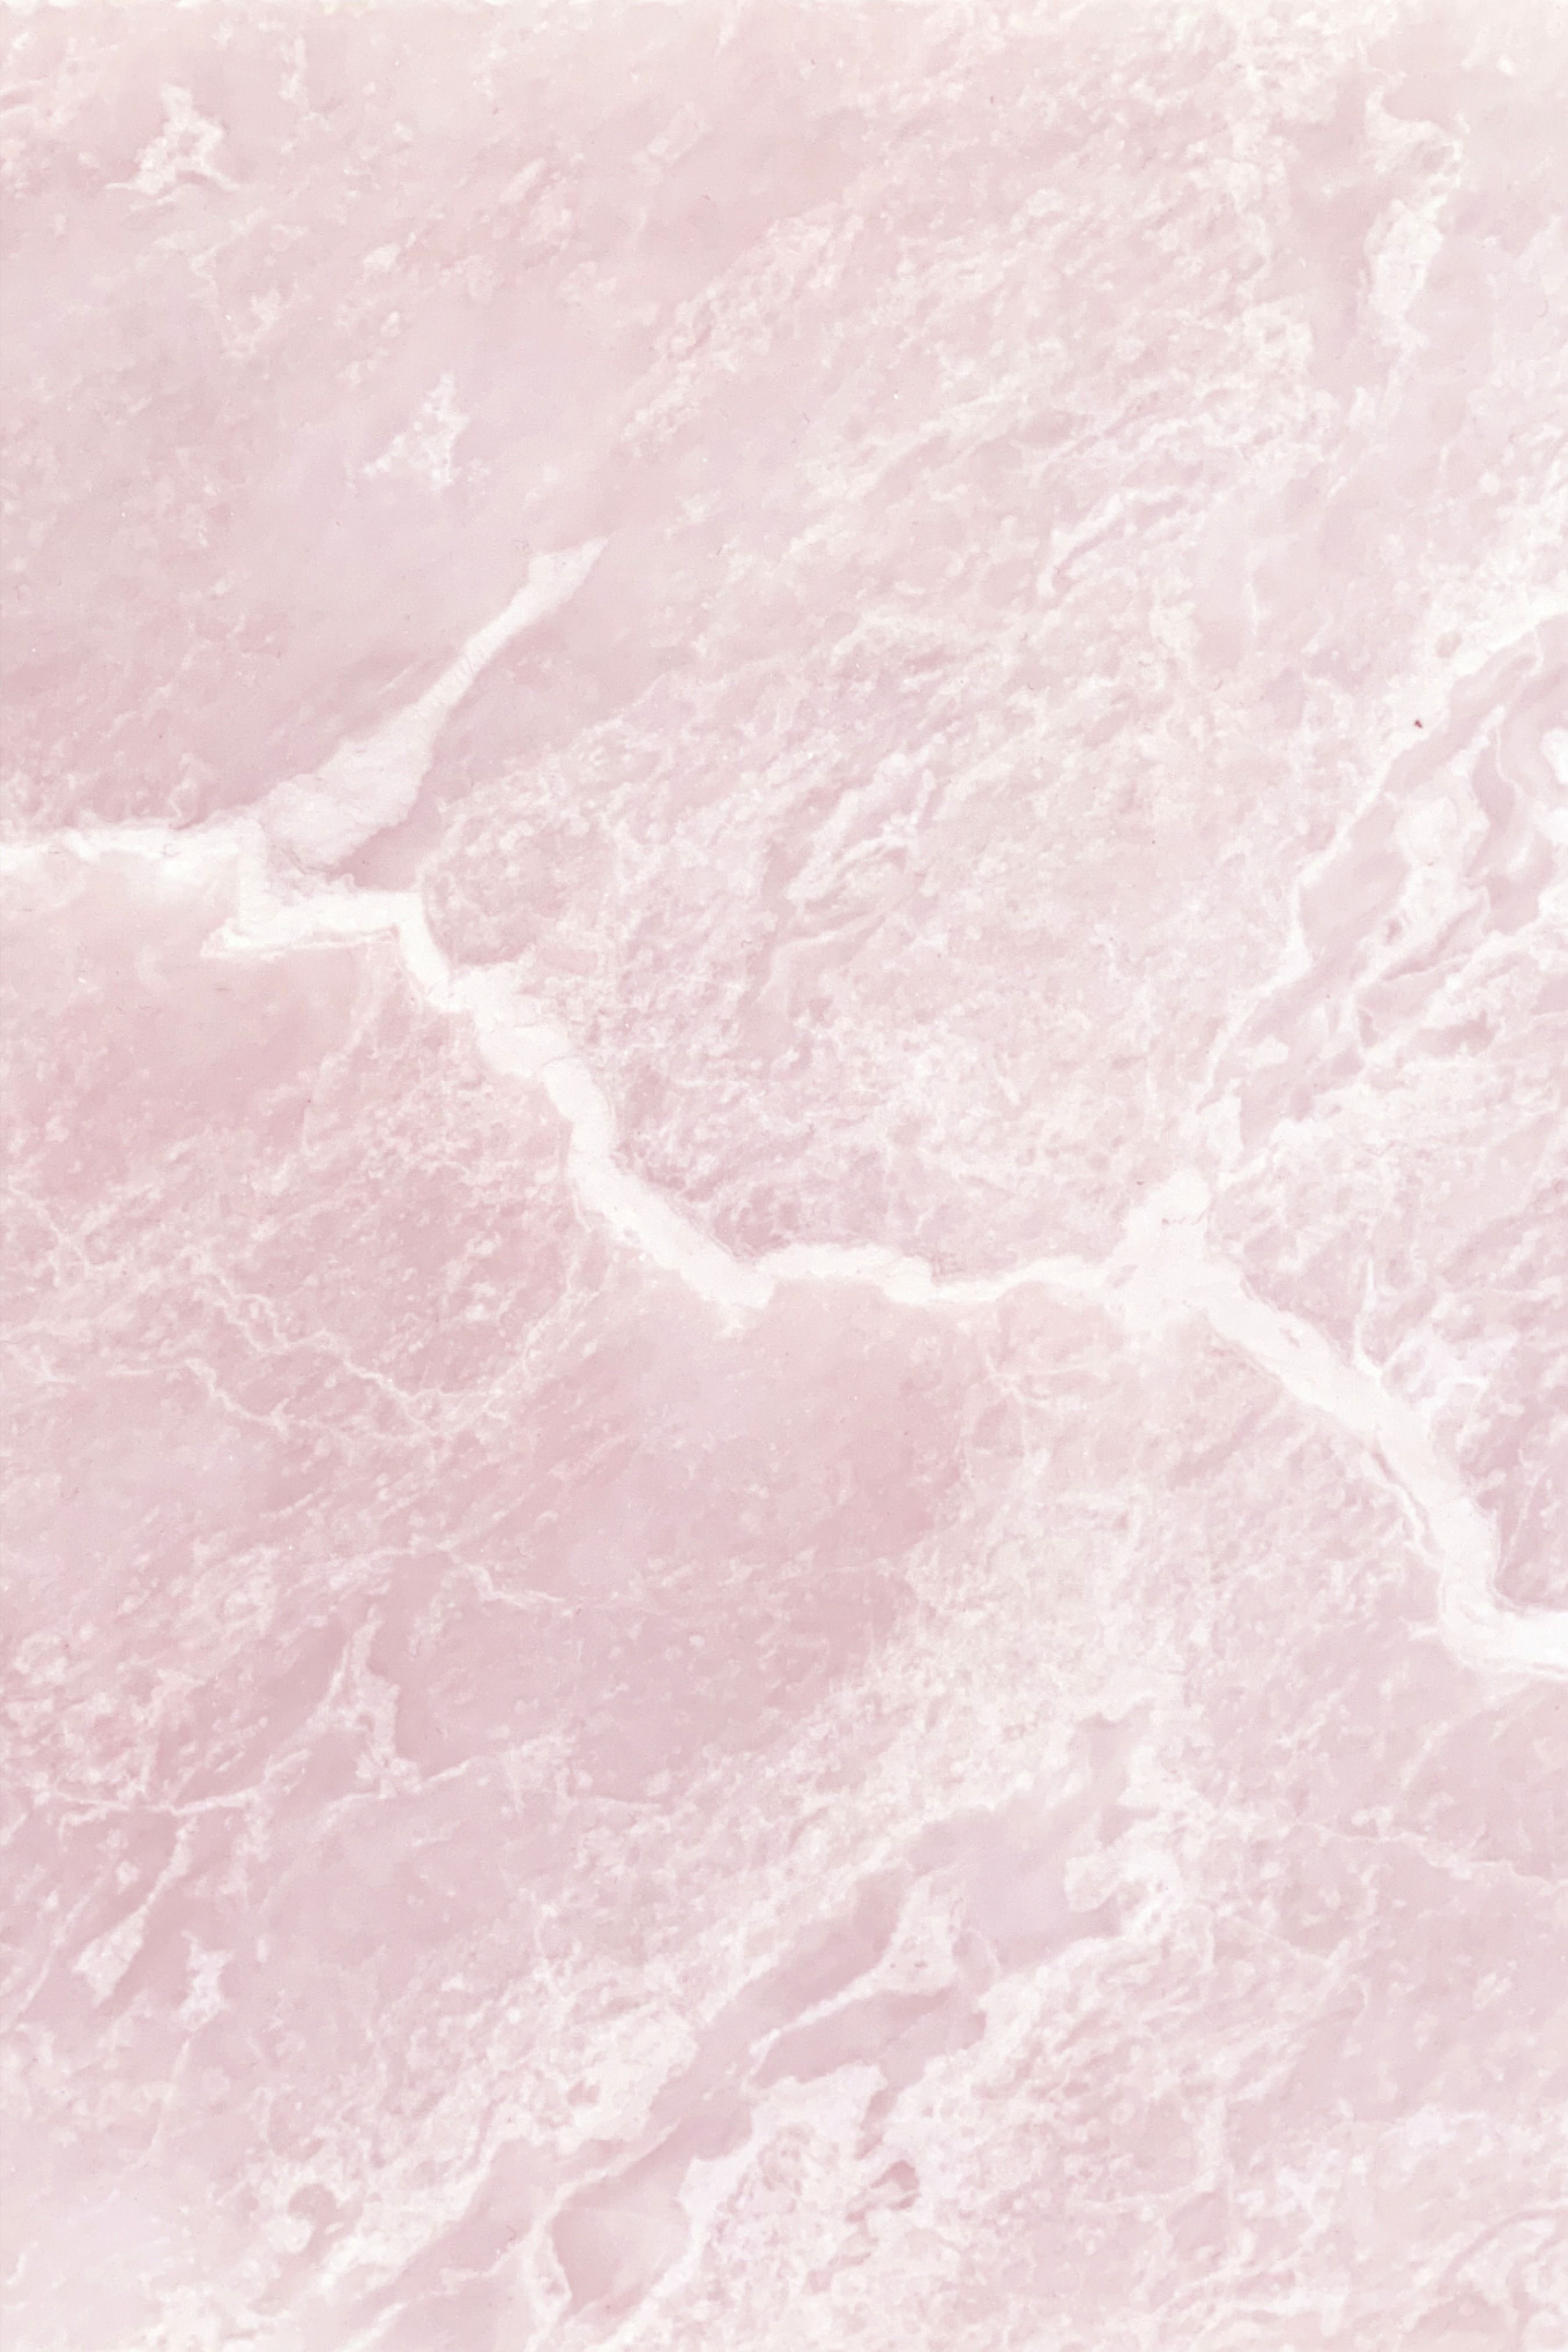 Light Pink Marble. Pink marble wallpaper, iPhone wallpaper lights, Pastel pink aesthetic